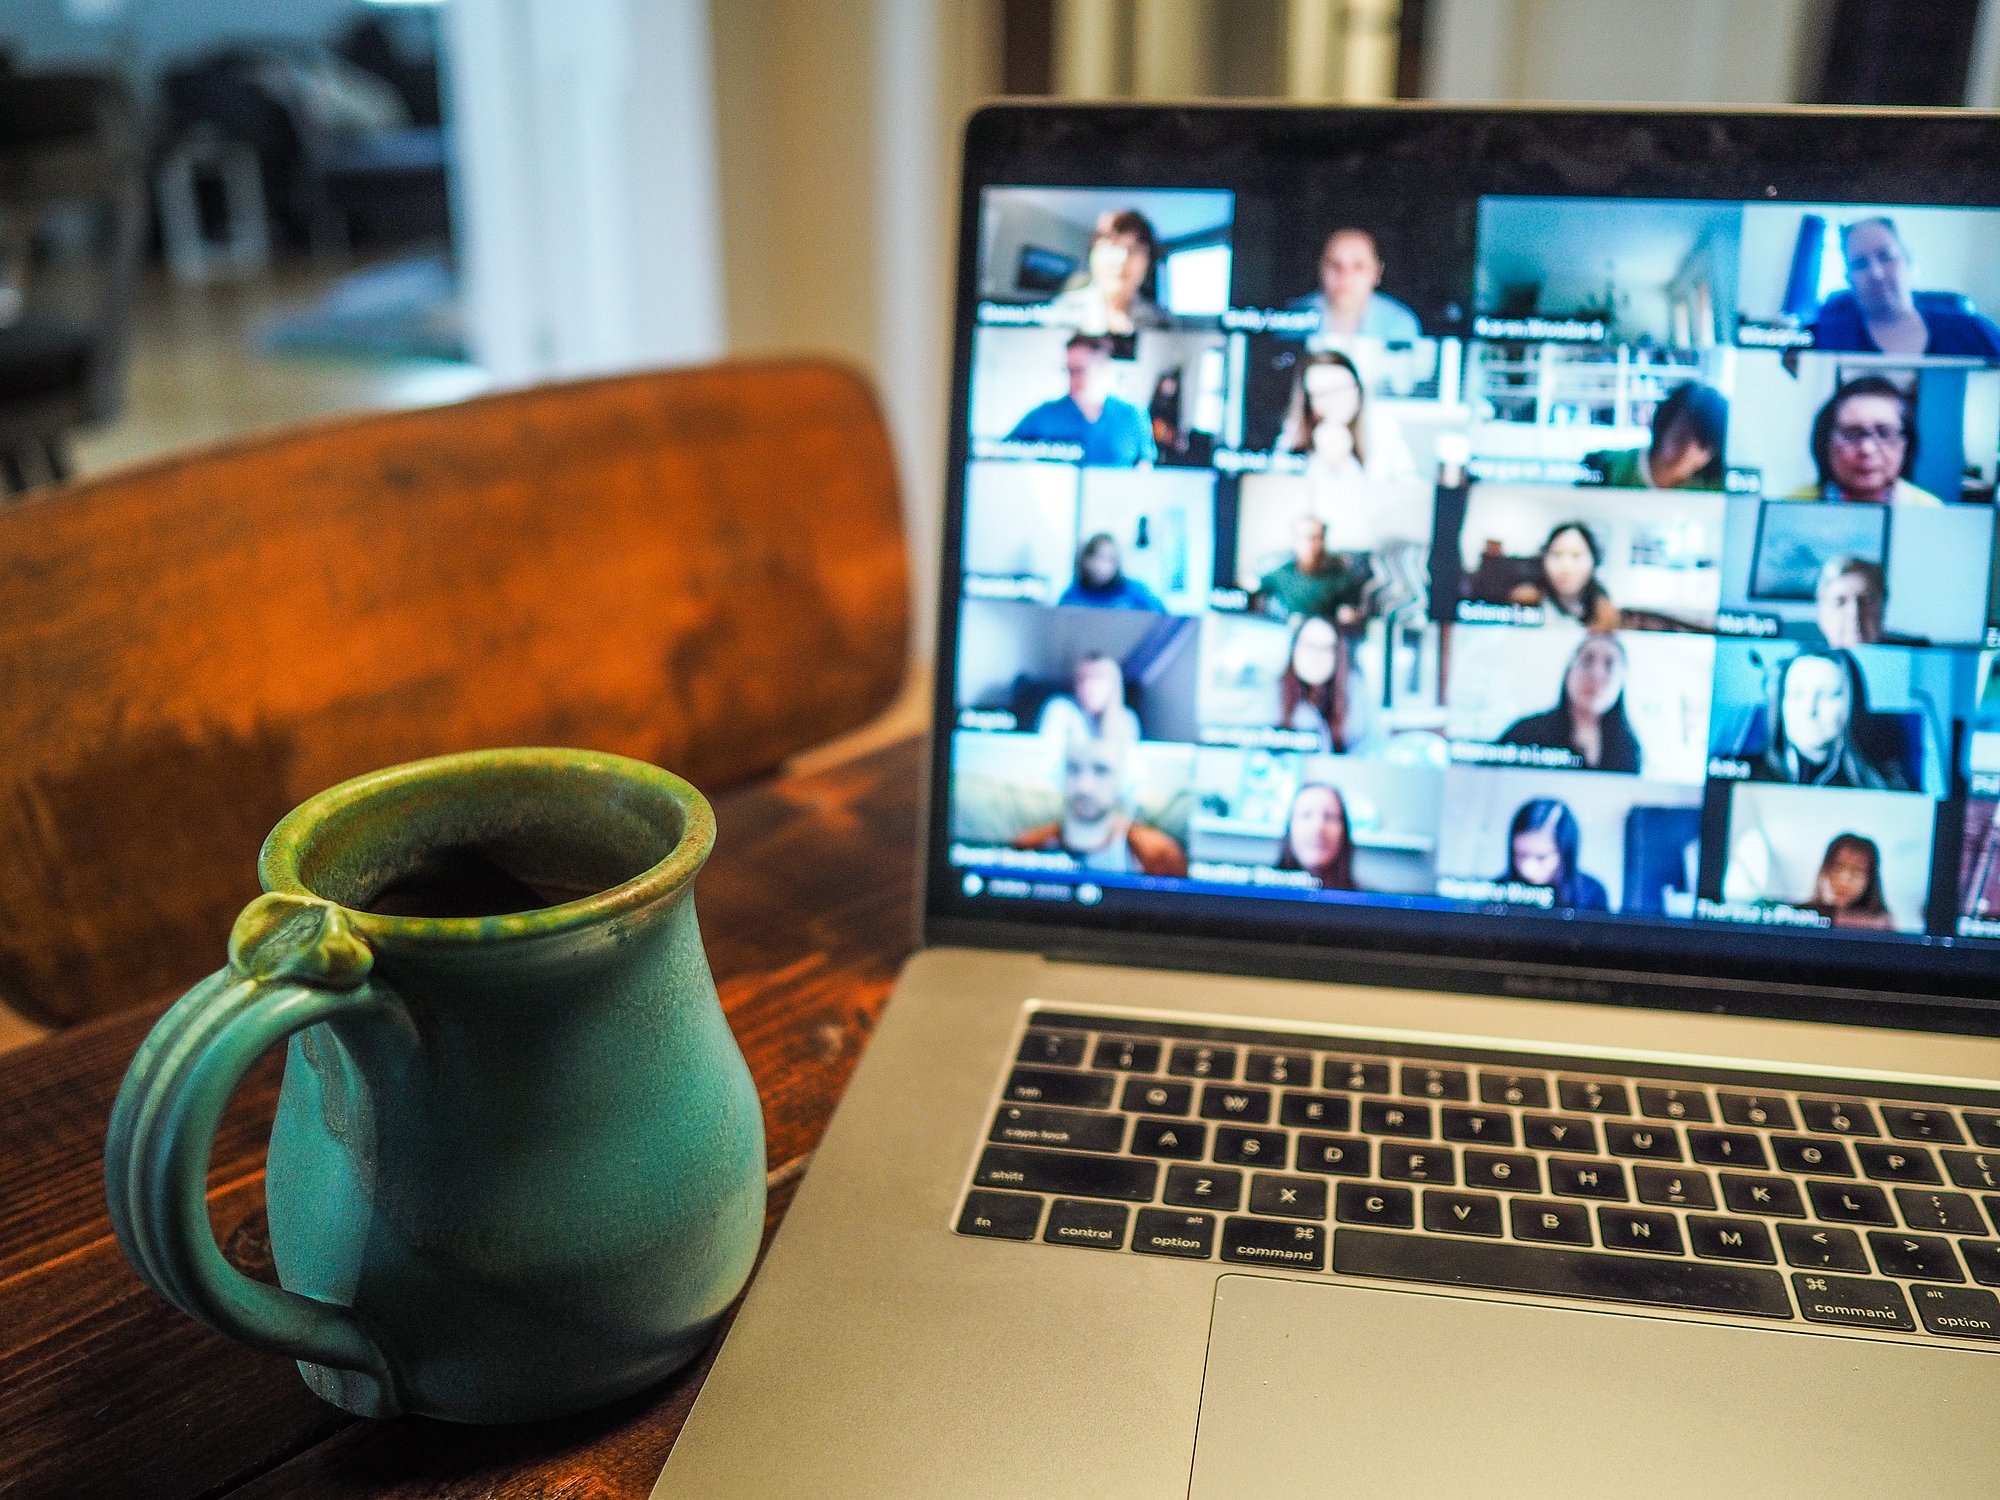 A laptop is on the table with a coffee in front of it and the screen shows that an online meeting is taking place.